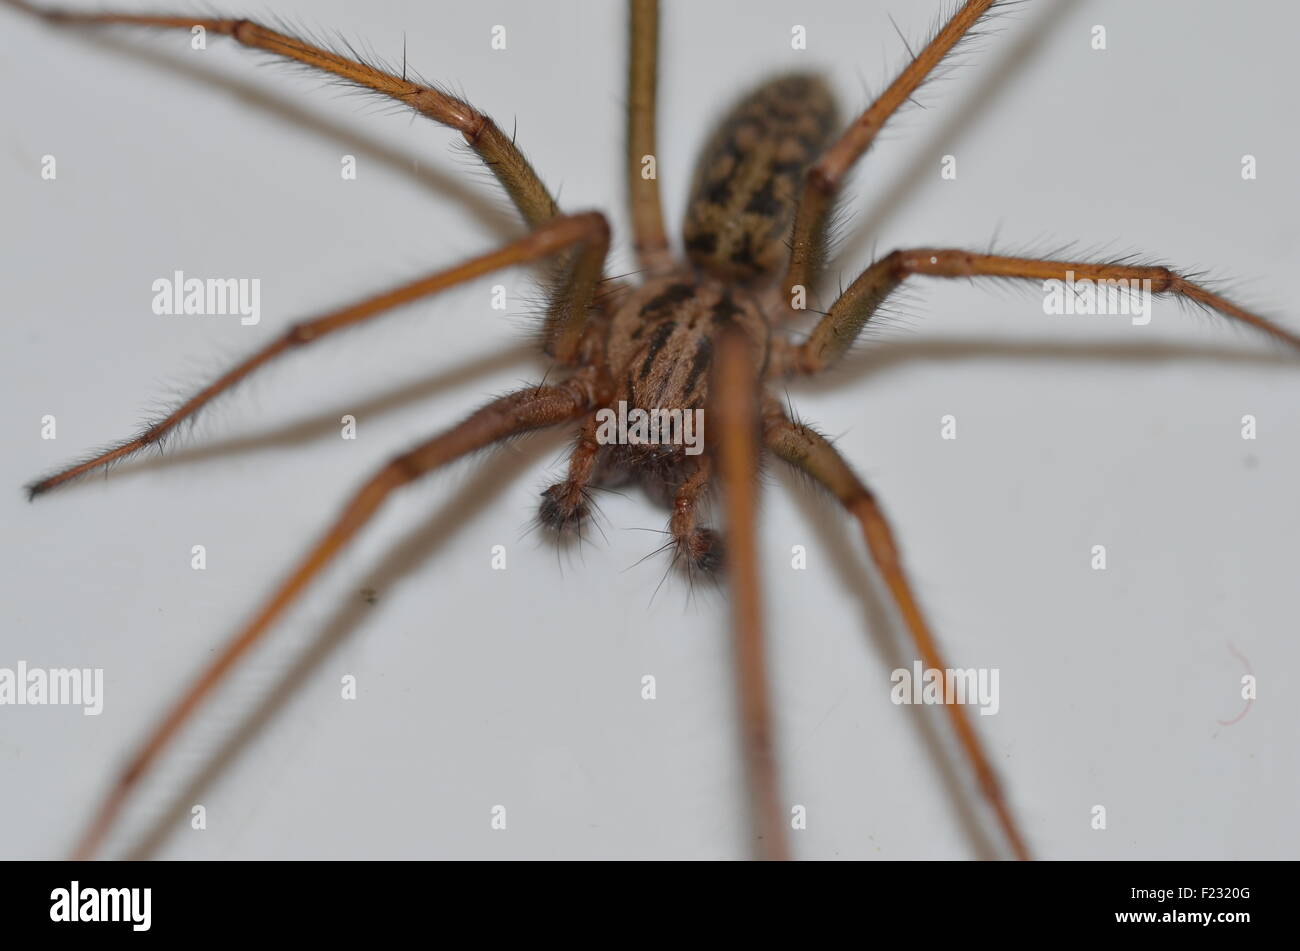 Large house spider Stock Photo